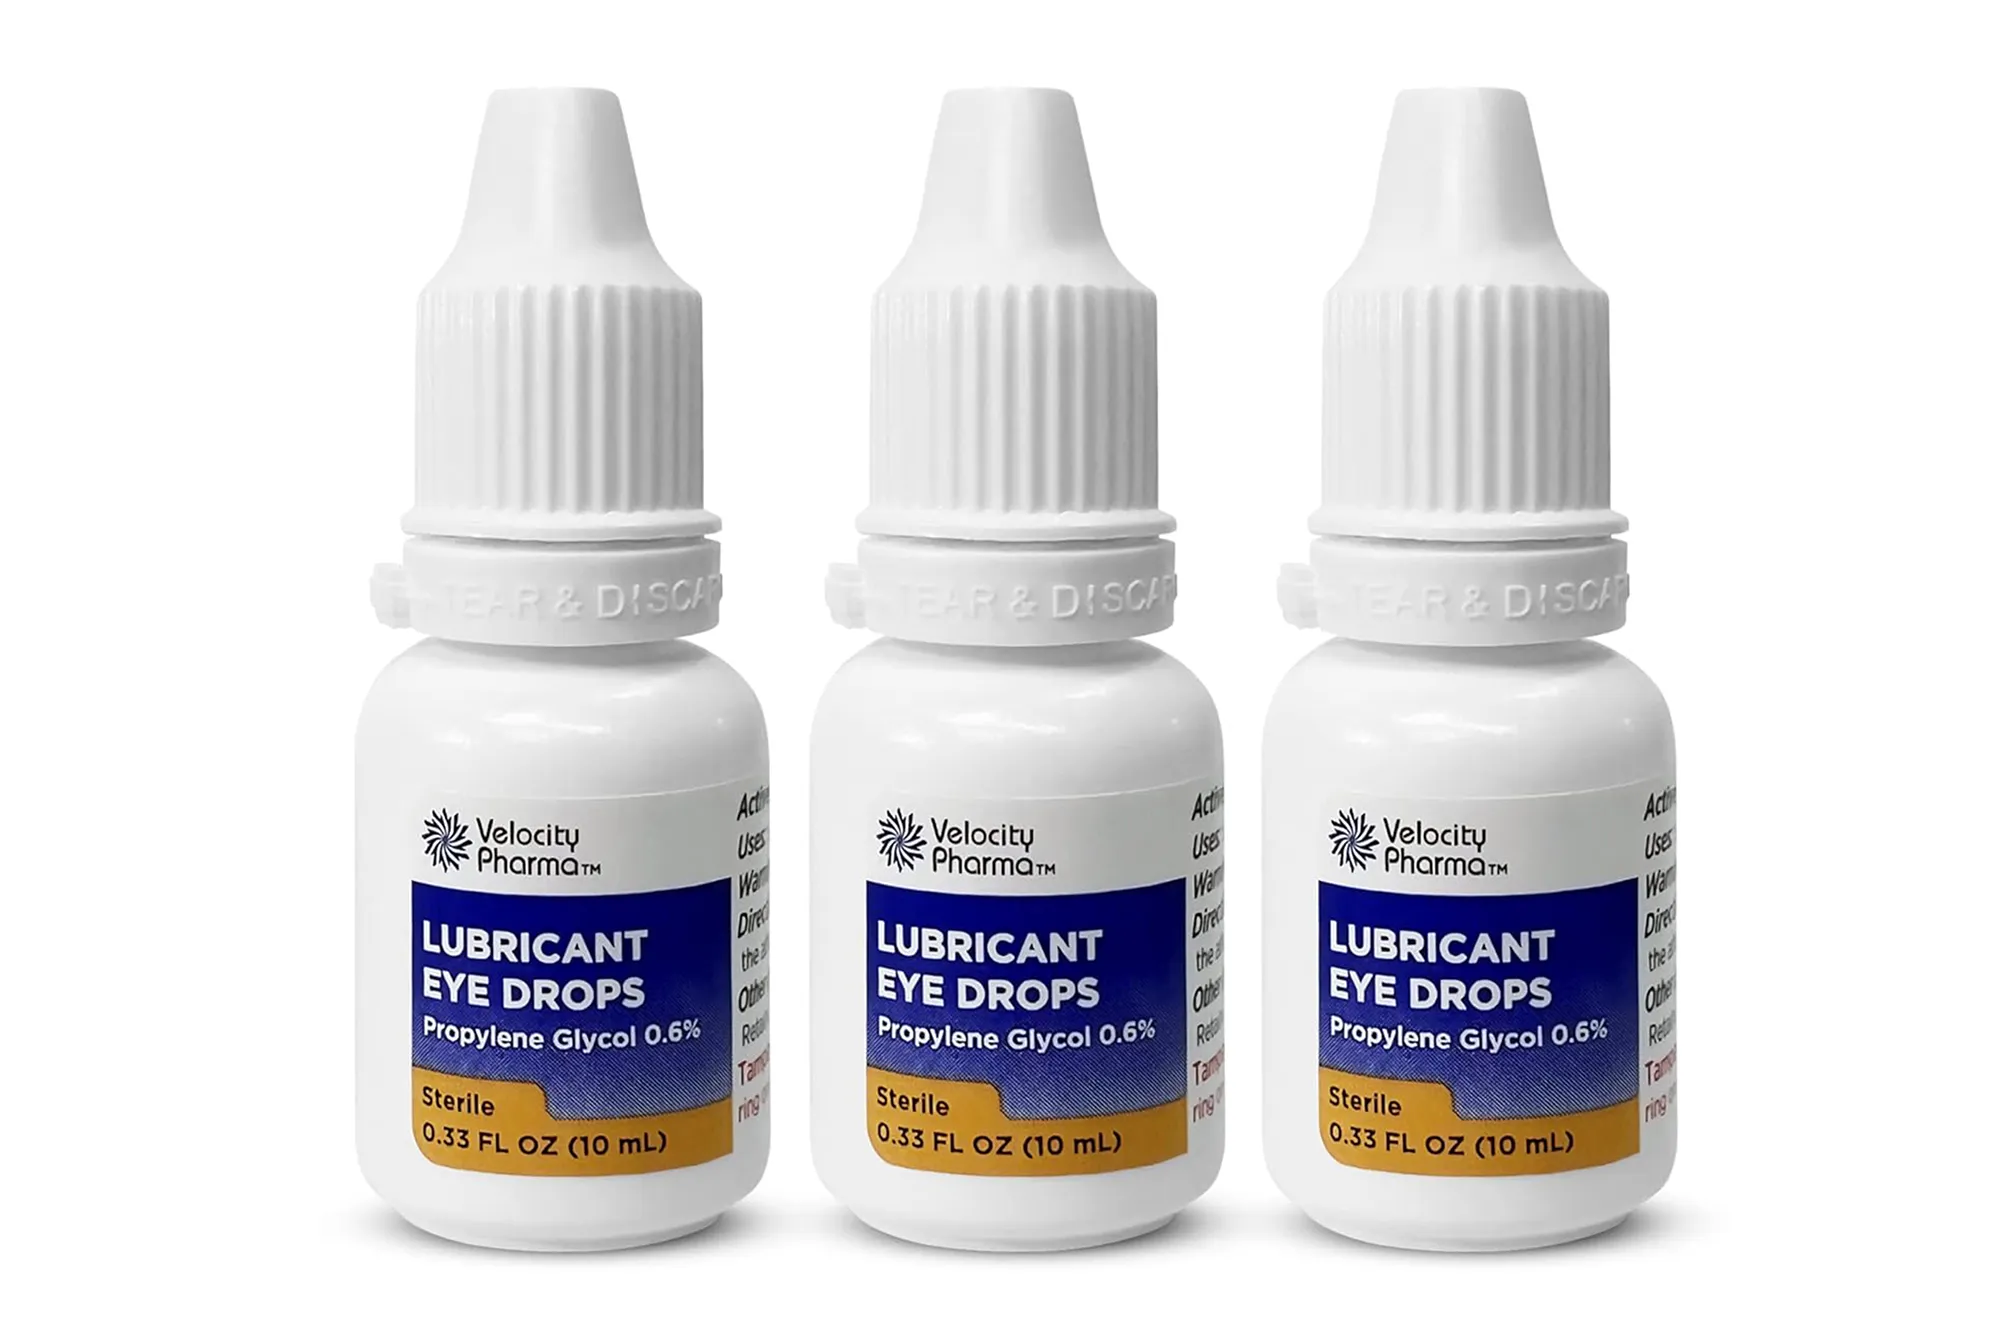 MoH issues voluntary recall notice of Lubricant Eye Drops